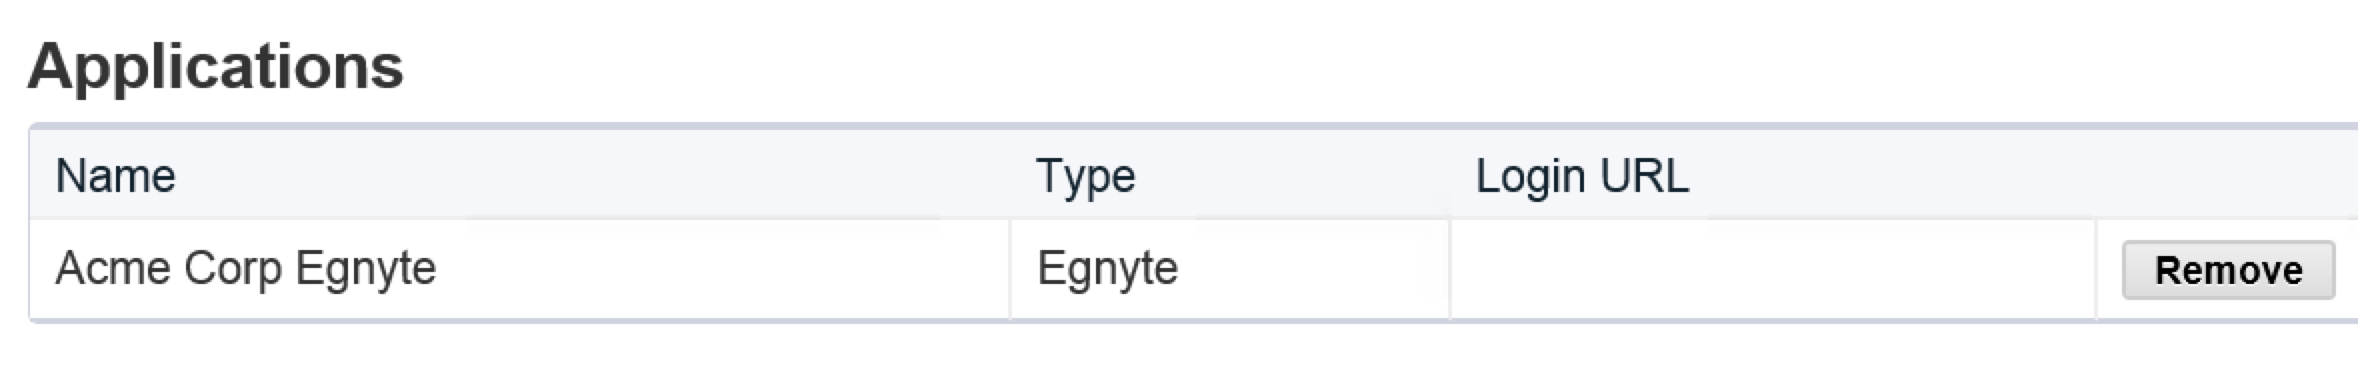 Egnyte Application Added